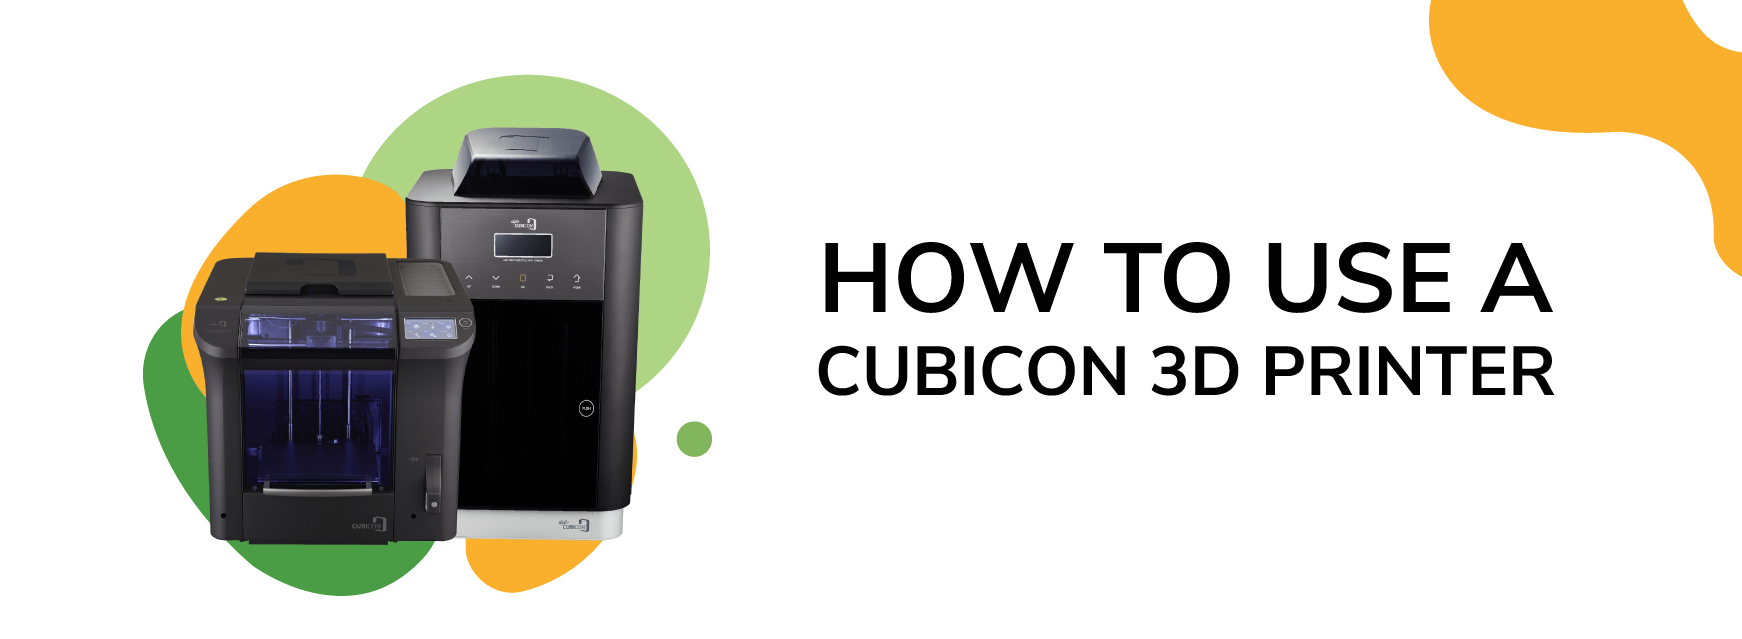 how to use a cubicon 3d printer 